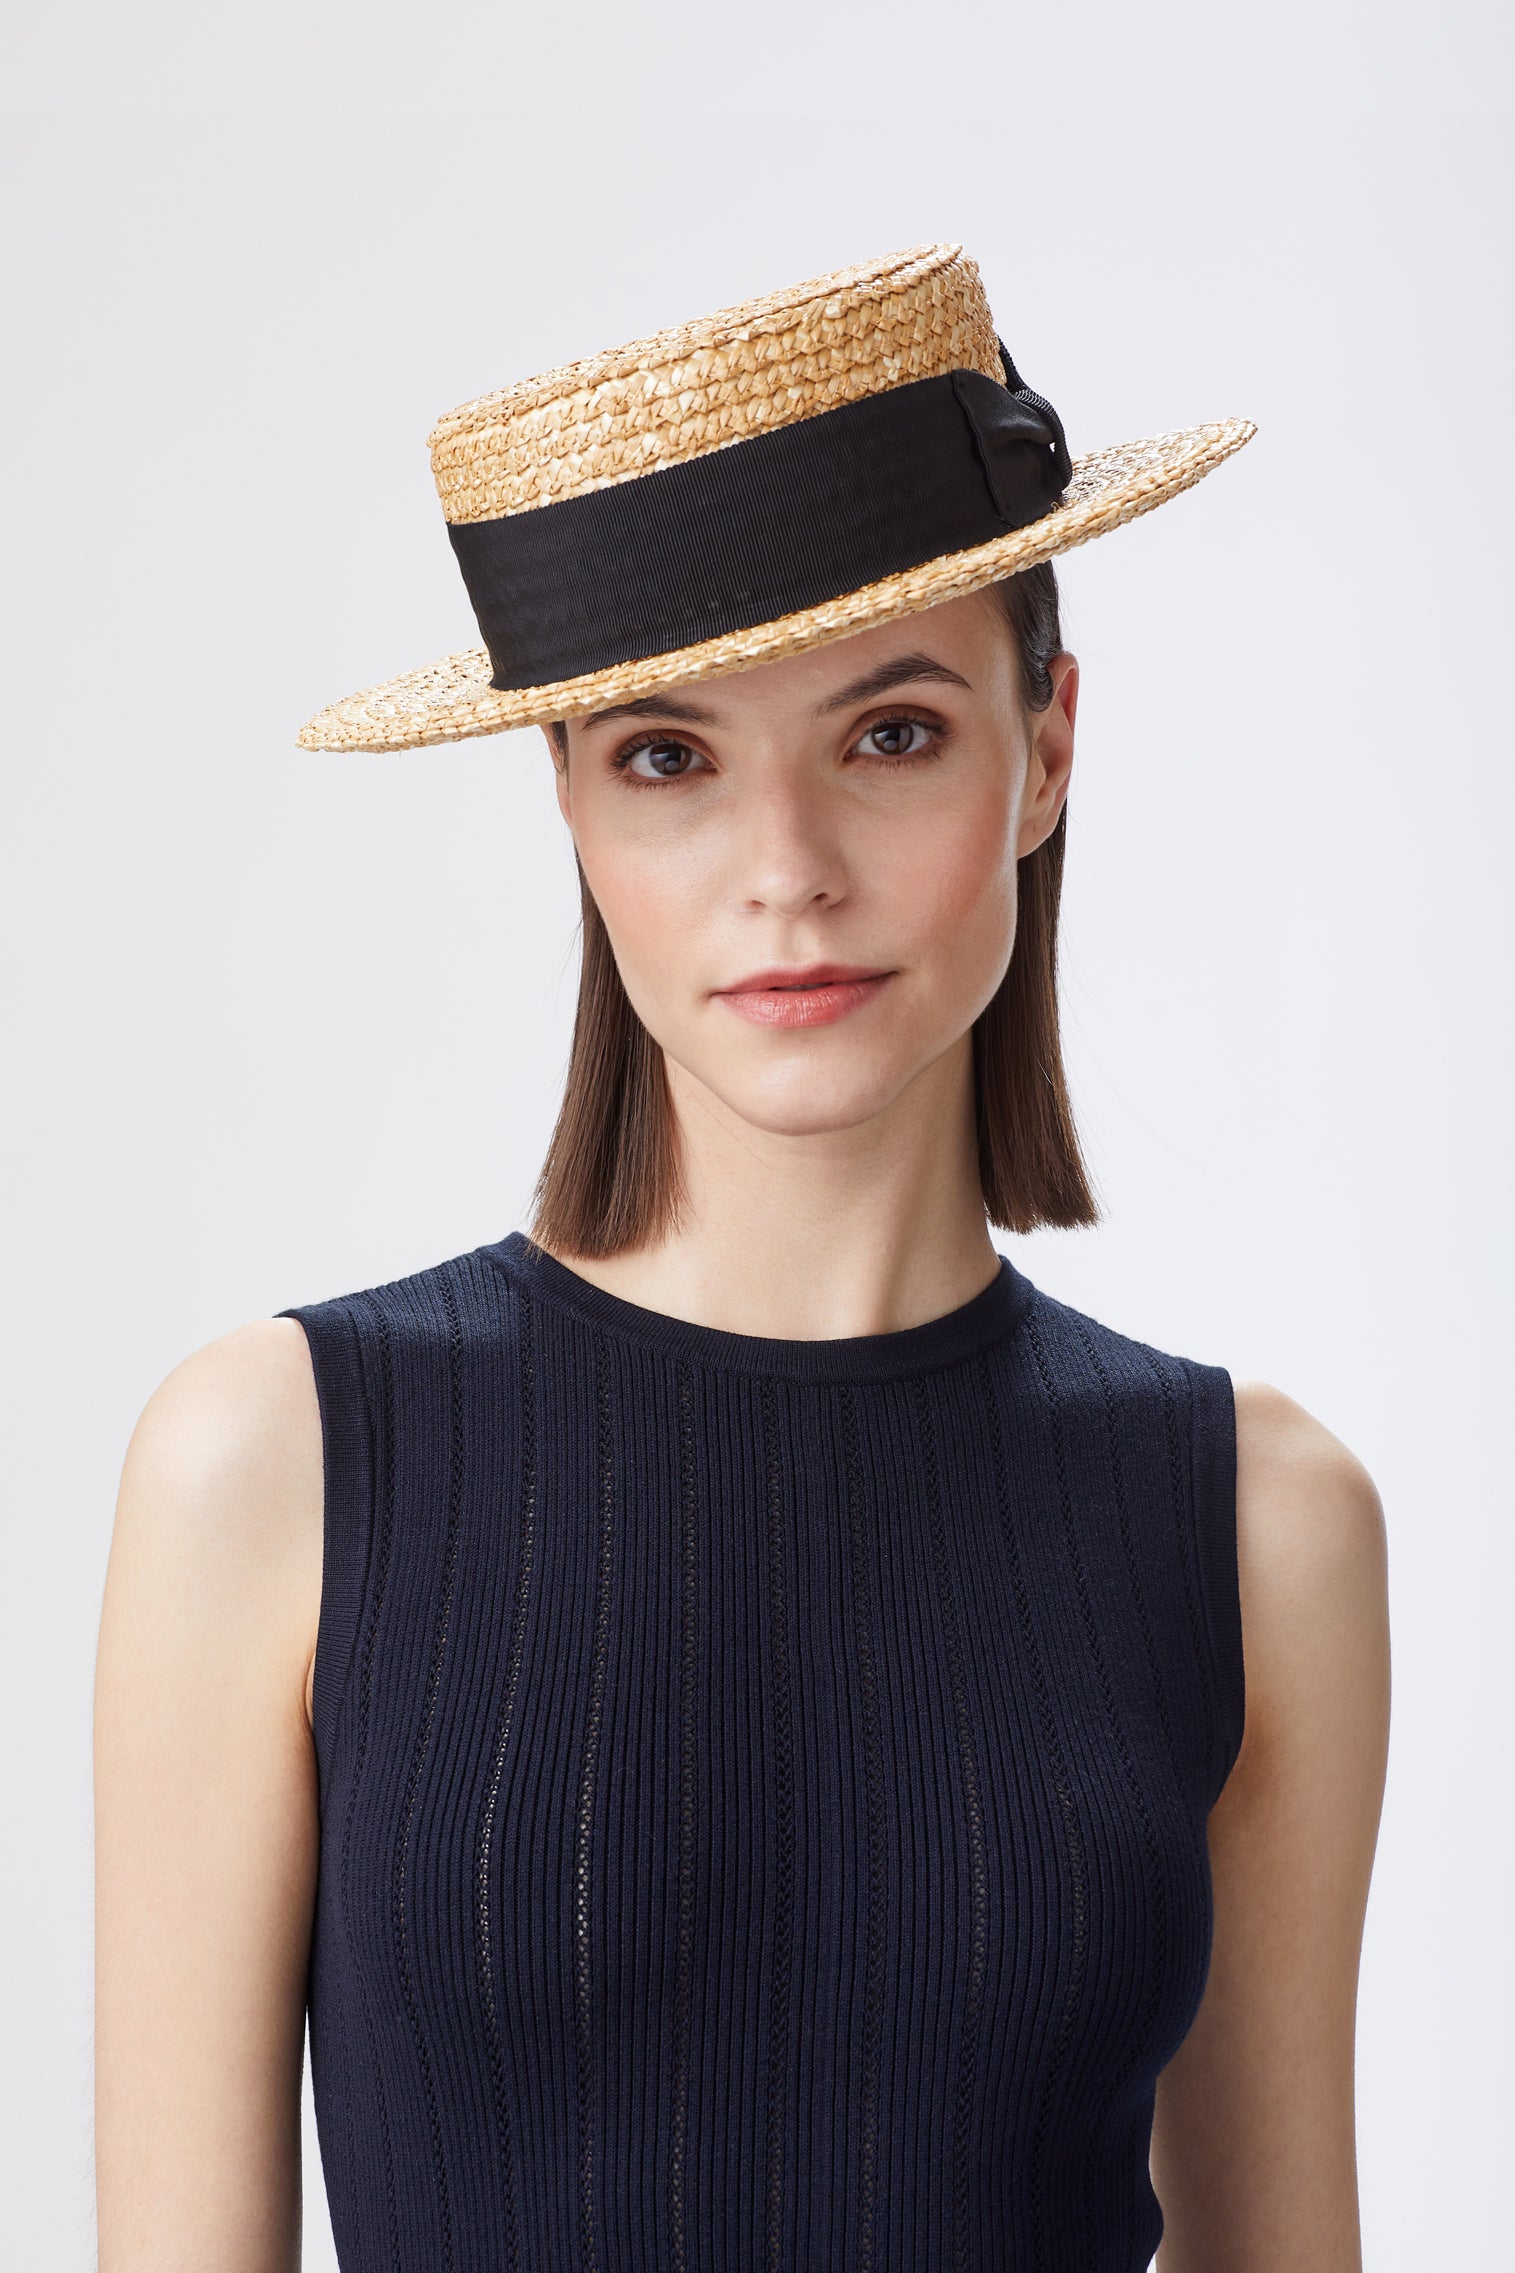 Classic Boater - Mens Featured - Lock & Co. Hatters London UK